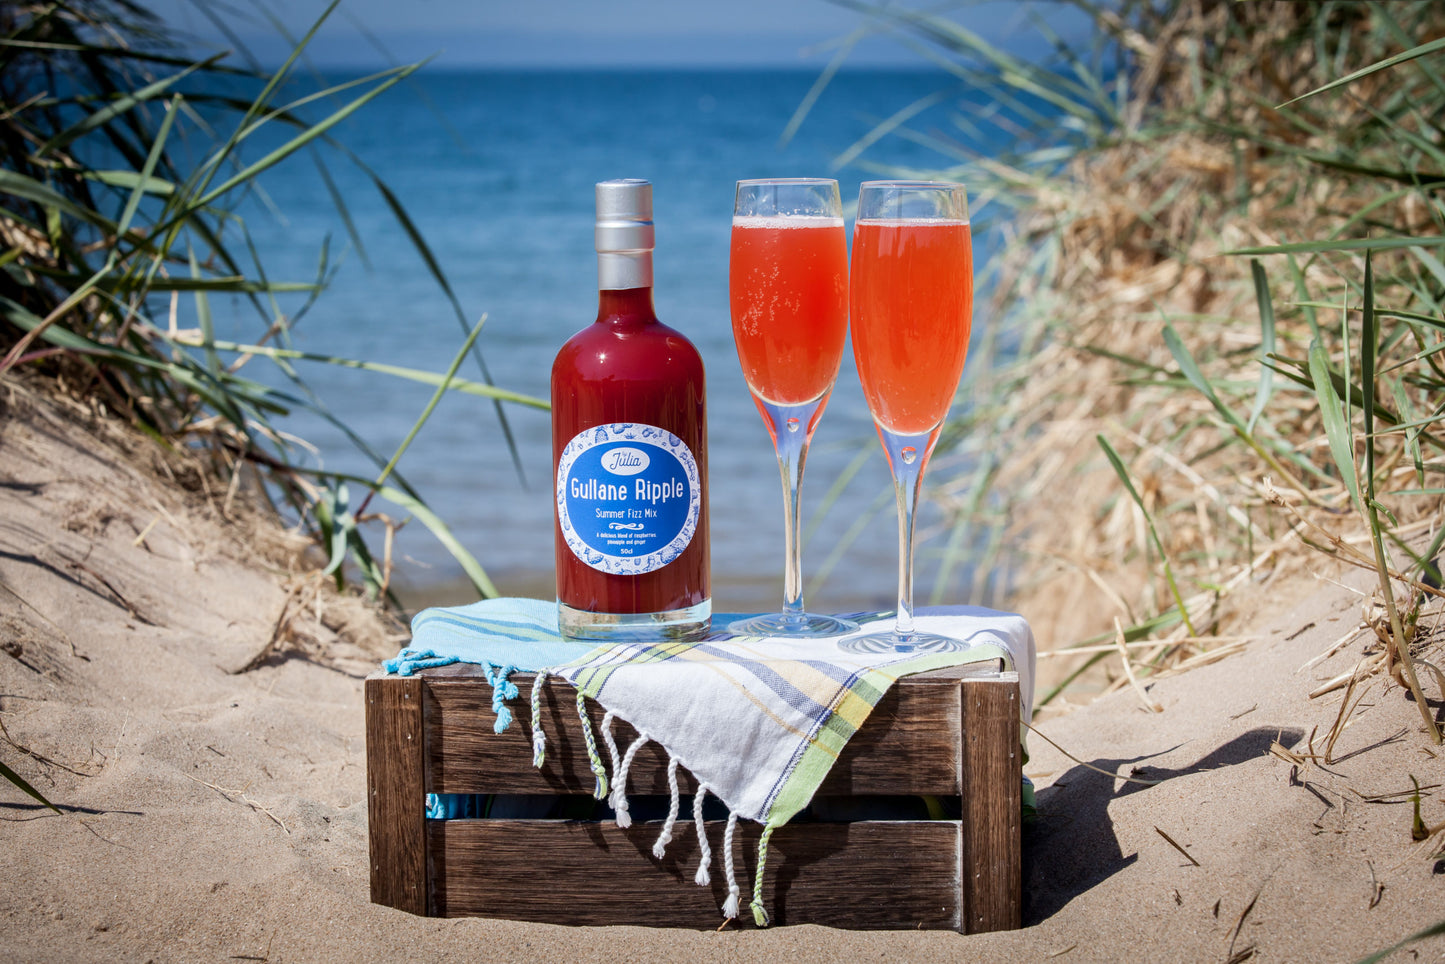 Large Bottle of Gullane Ripple Summer Fizz Mix and two glasses of cocktail on wooden crate with beach in background